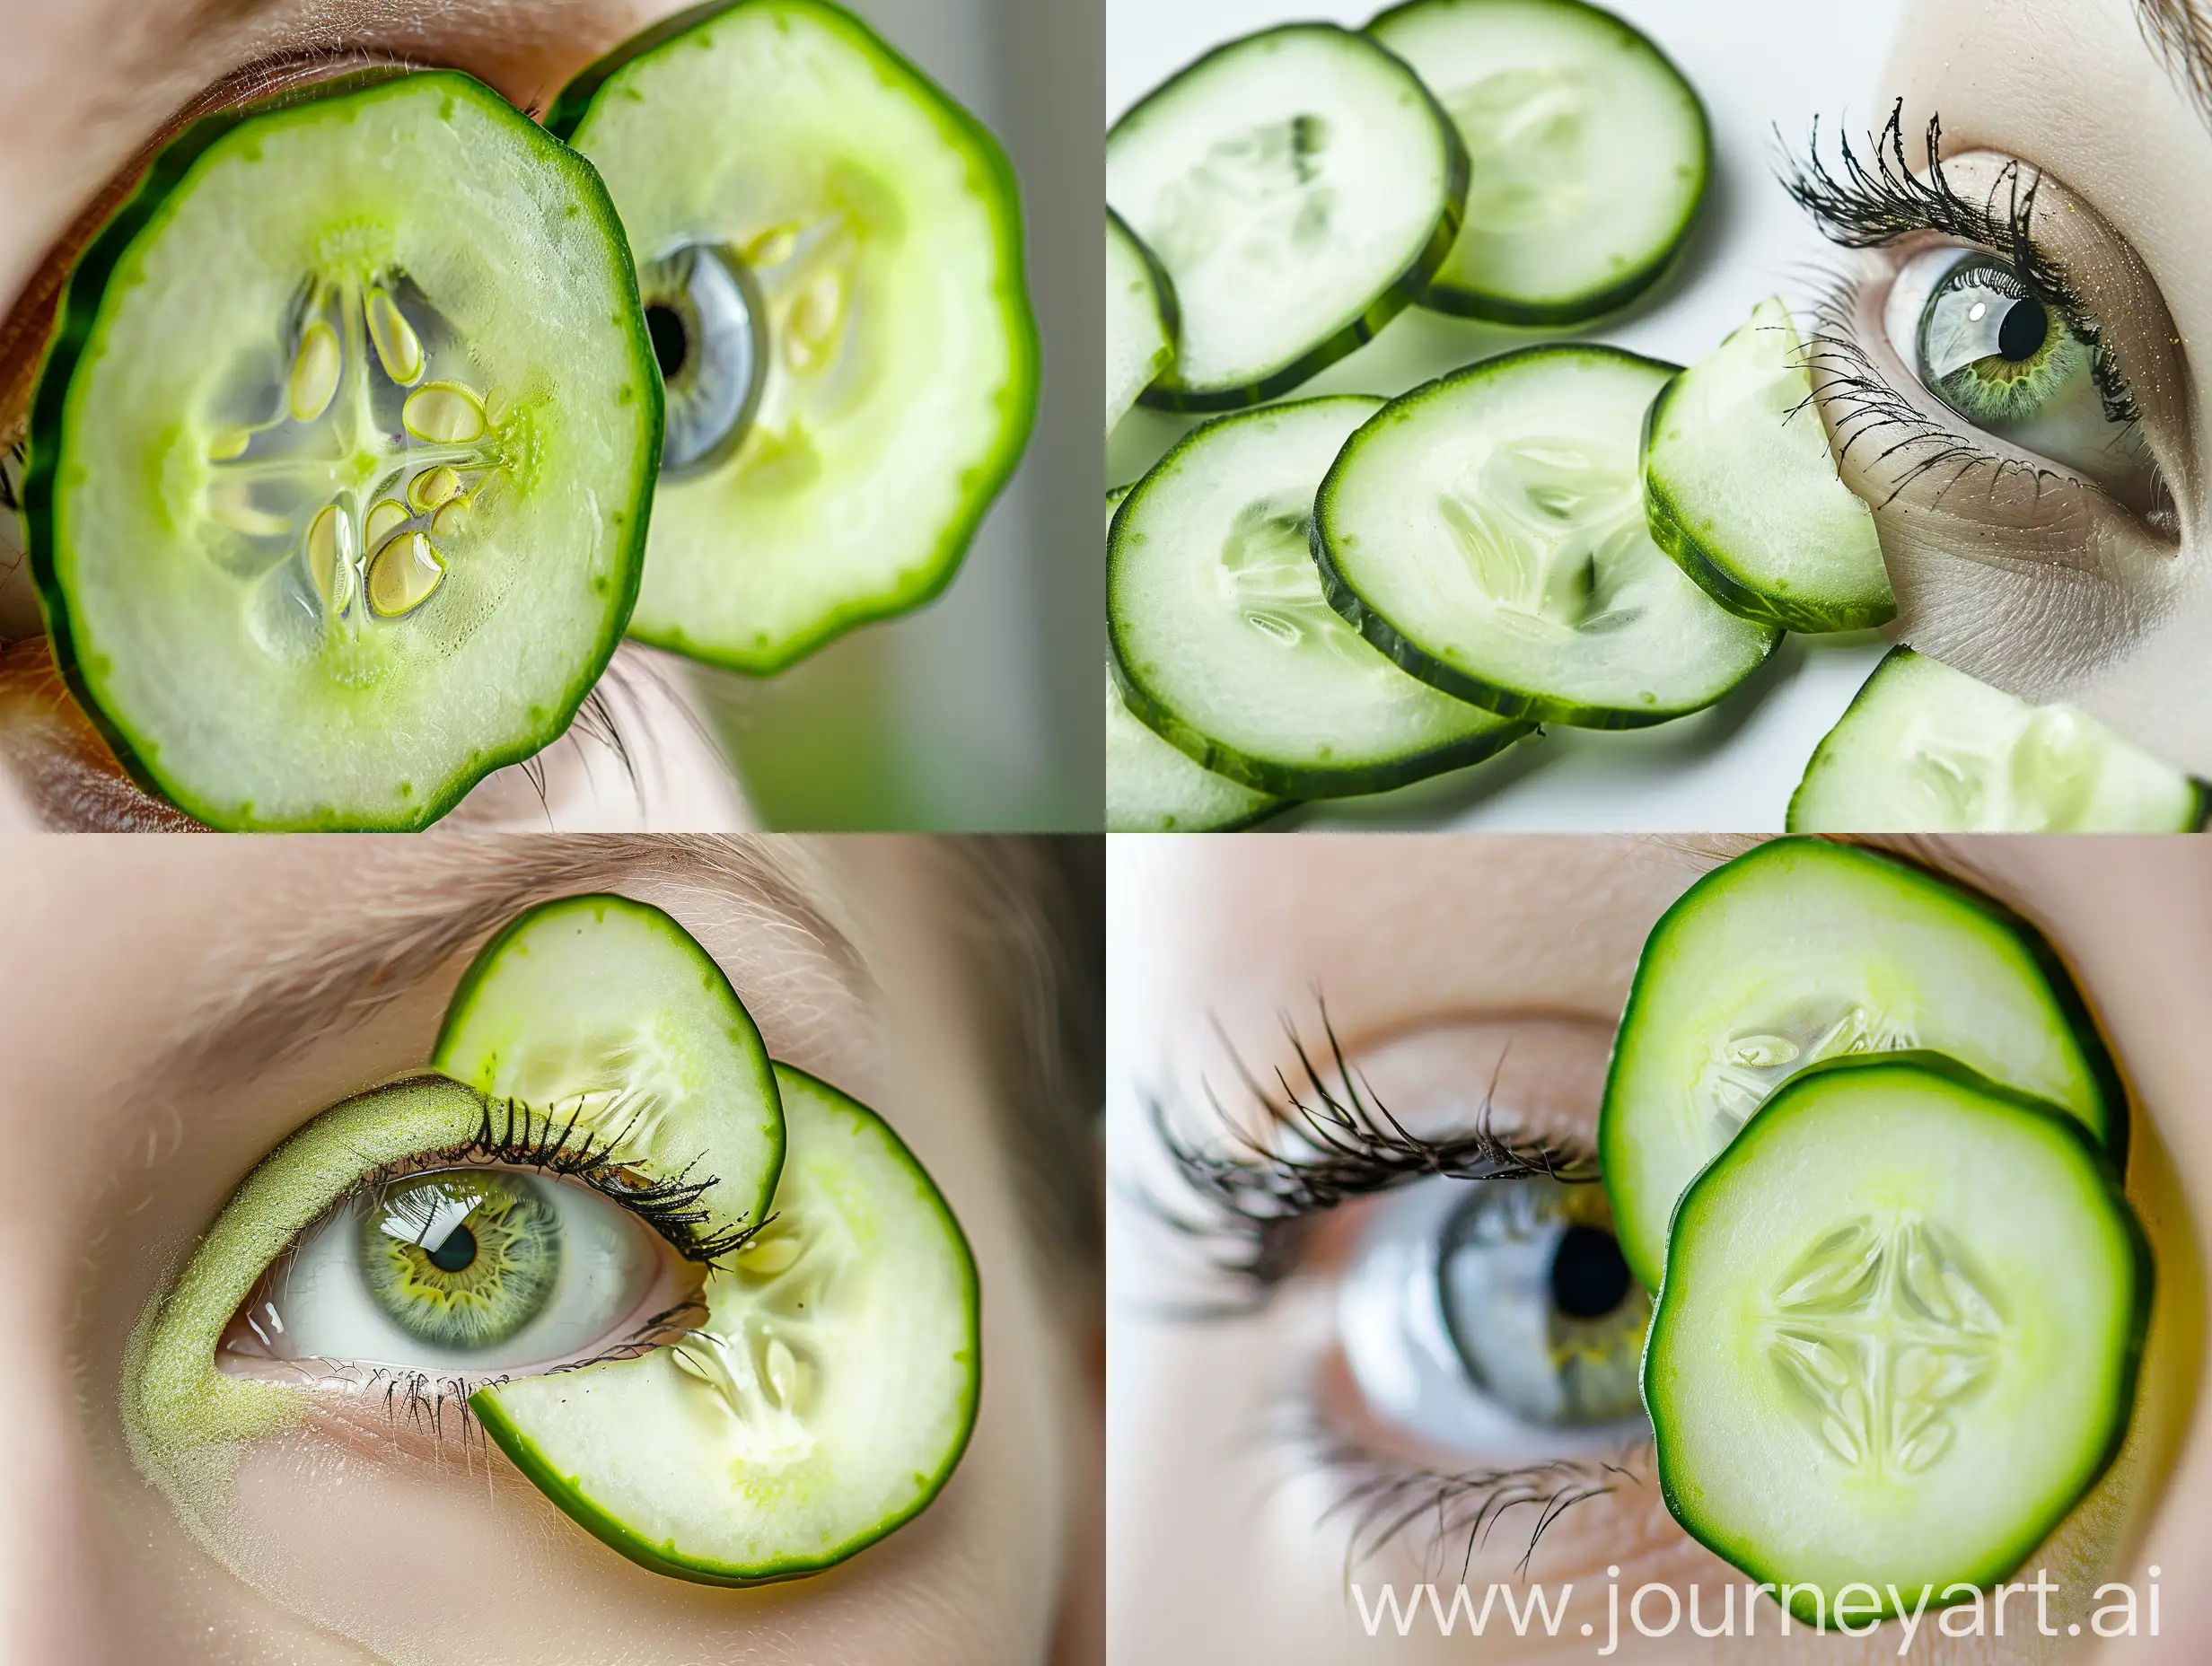 Real photo with natural light of sliced cucumber on the eye